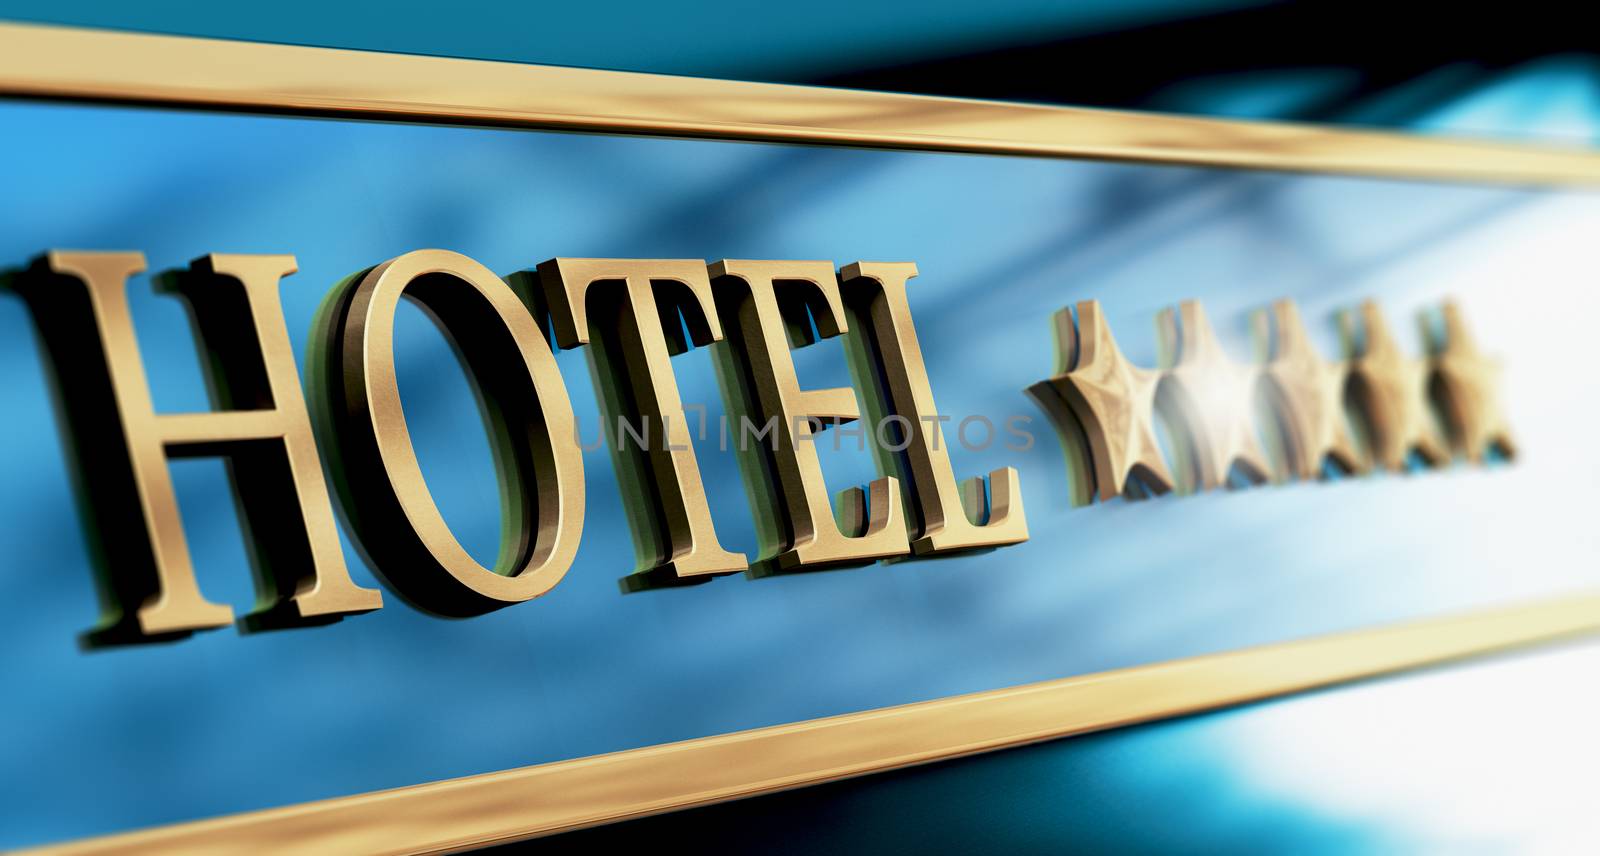 Five stars hotel sign written with golden letters over blue background. Horizontal image suitagle for header